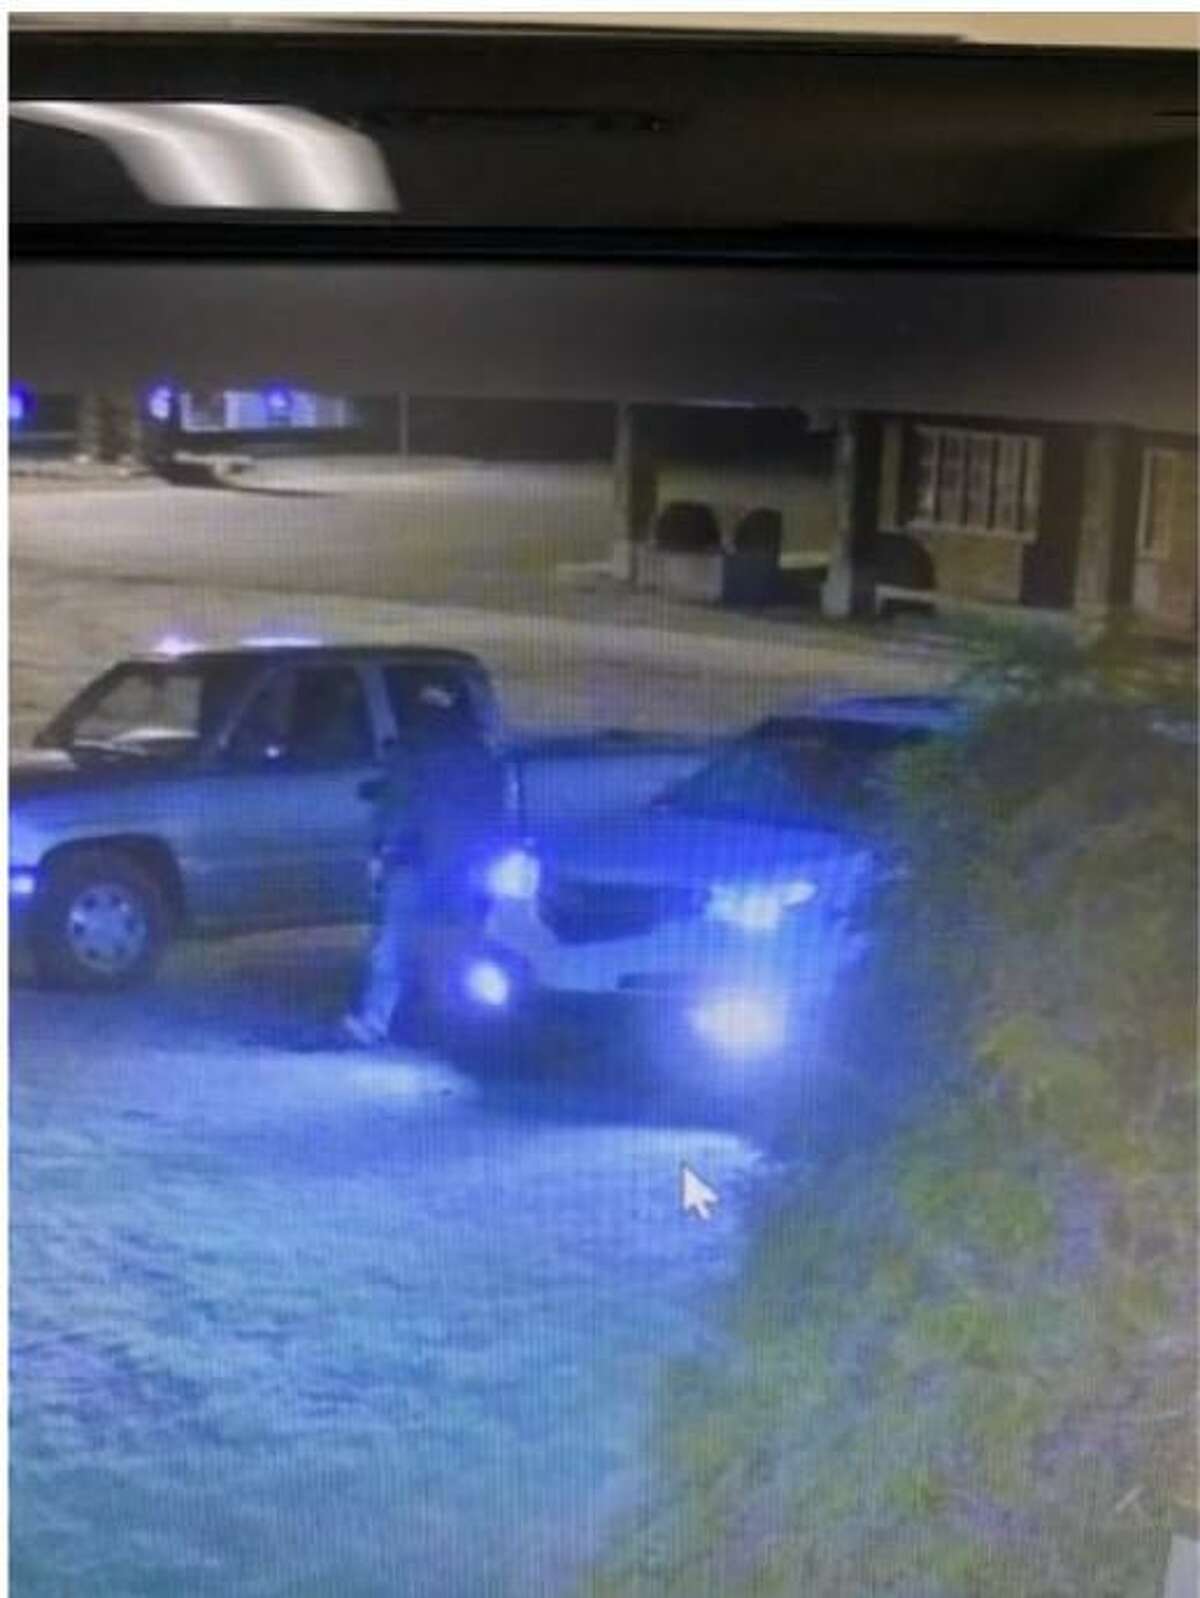 STAFFORD, Conn. — Police are asking for the public’s help identifying this suspect believed to have stolen catalytic converters from vehicles at a pool business overnight Tuesday, April 13, 2021.